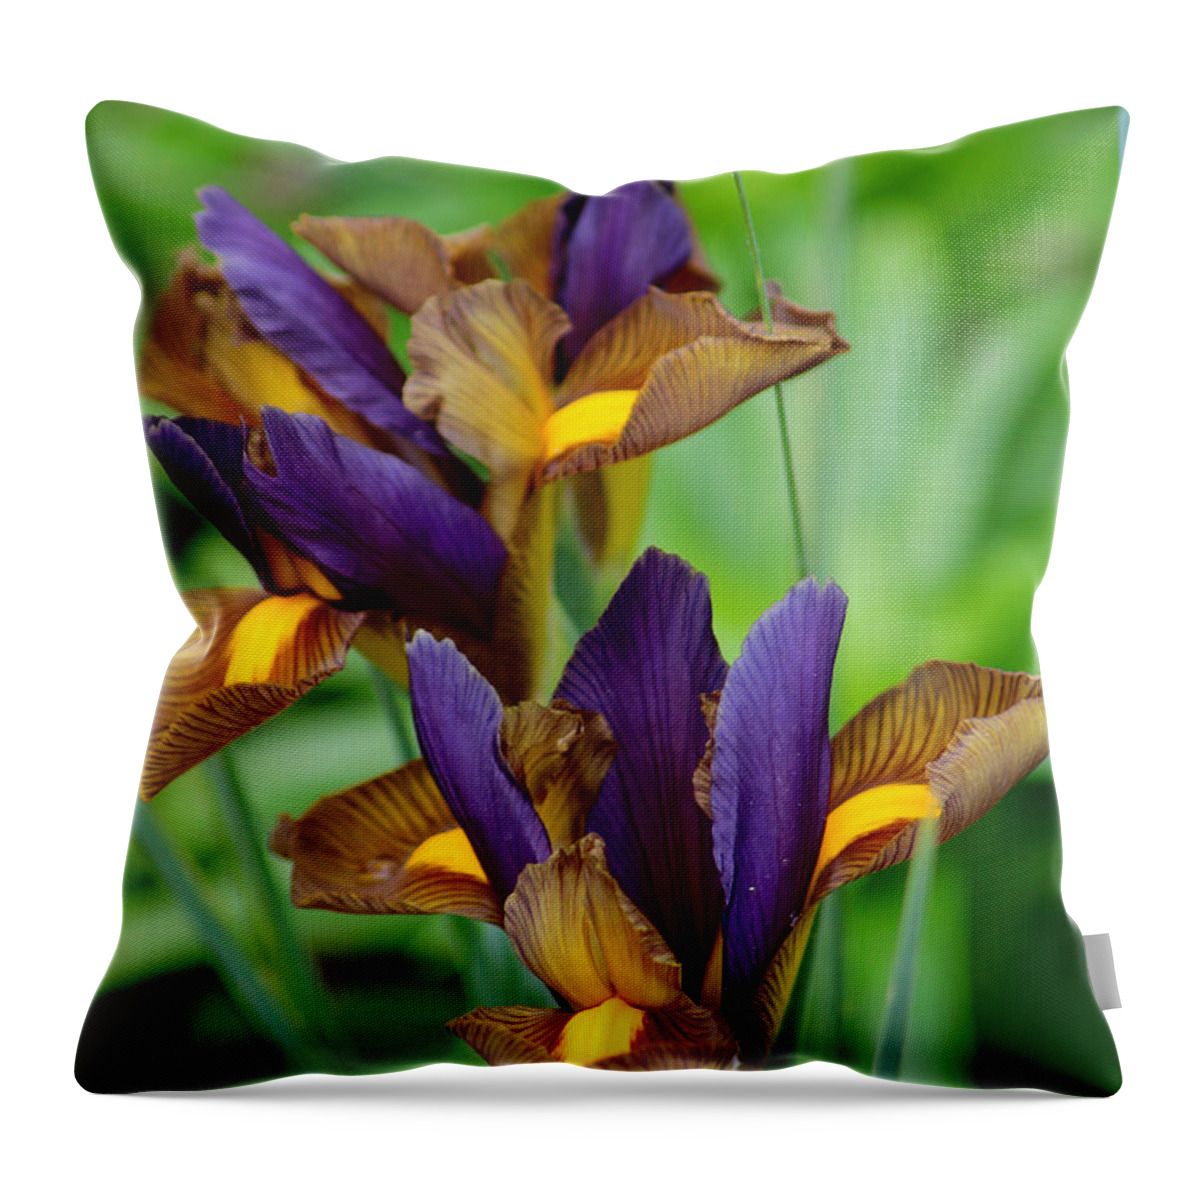 Tiger Irises Throw Pillow featuring the photograph Tiger Irises #1 by Living Color Photography Lorraine Lynch